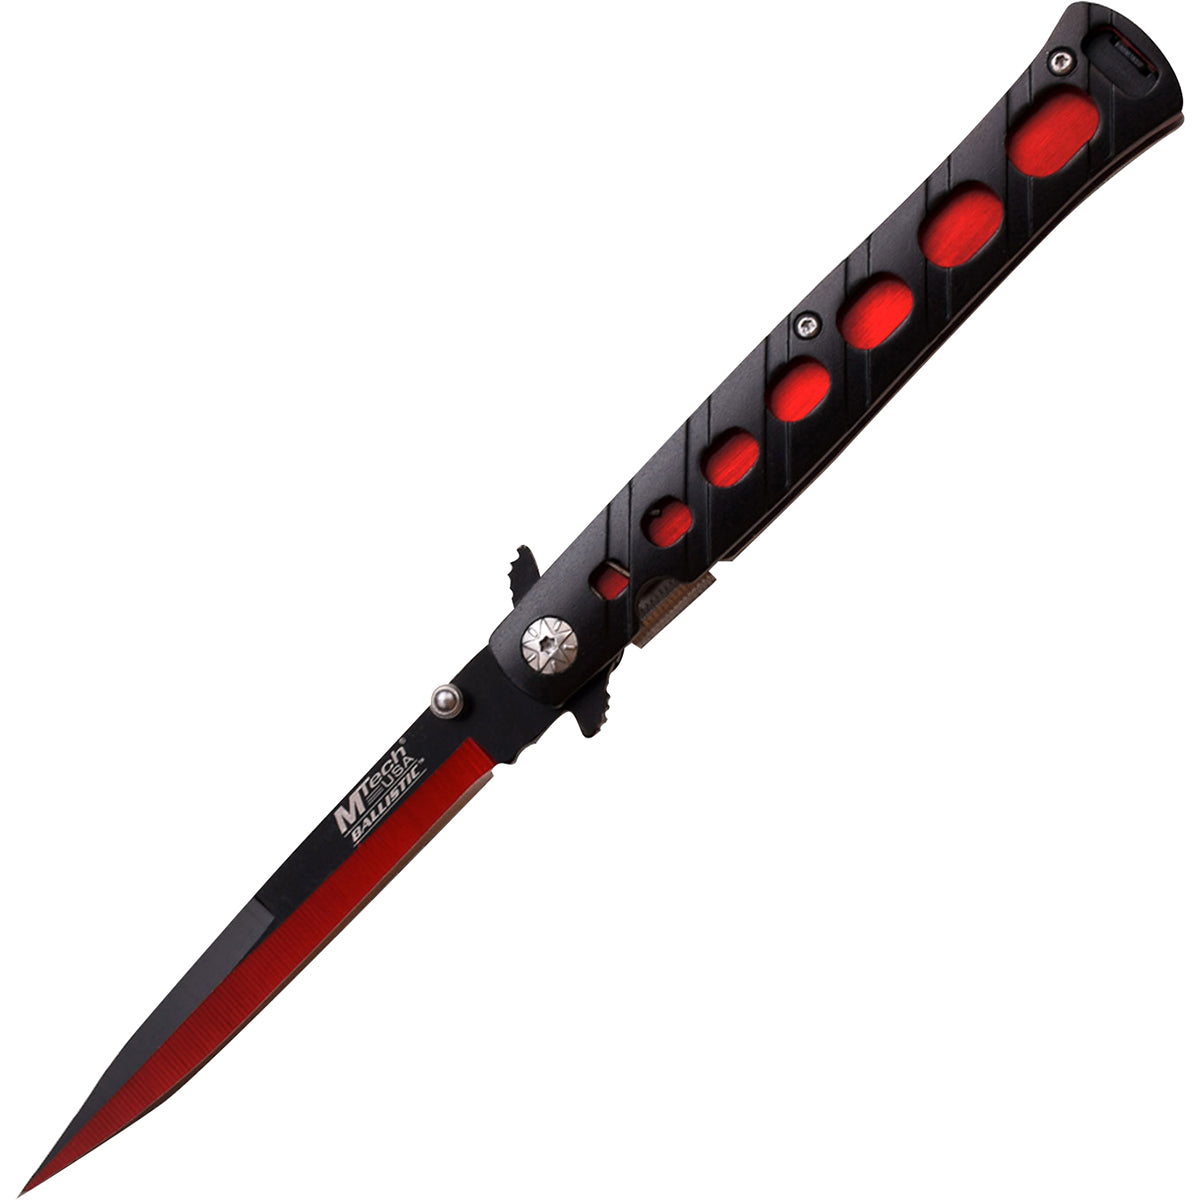 MTech USA Rescue Linerlock Spring Assisted Tanto Folding Knife, Red, MT-A317RD M-Tech